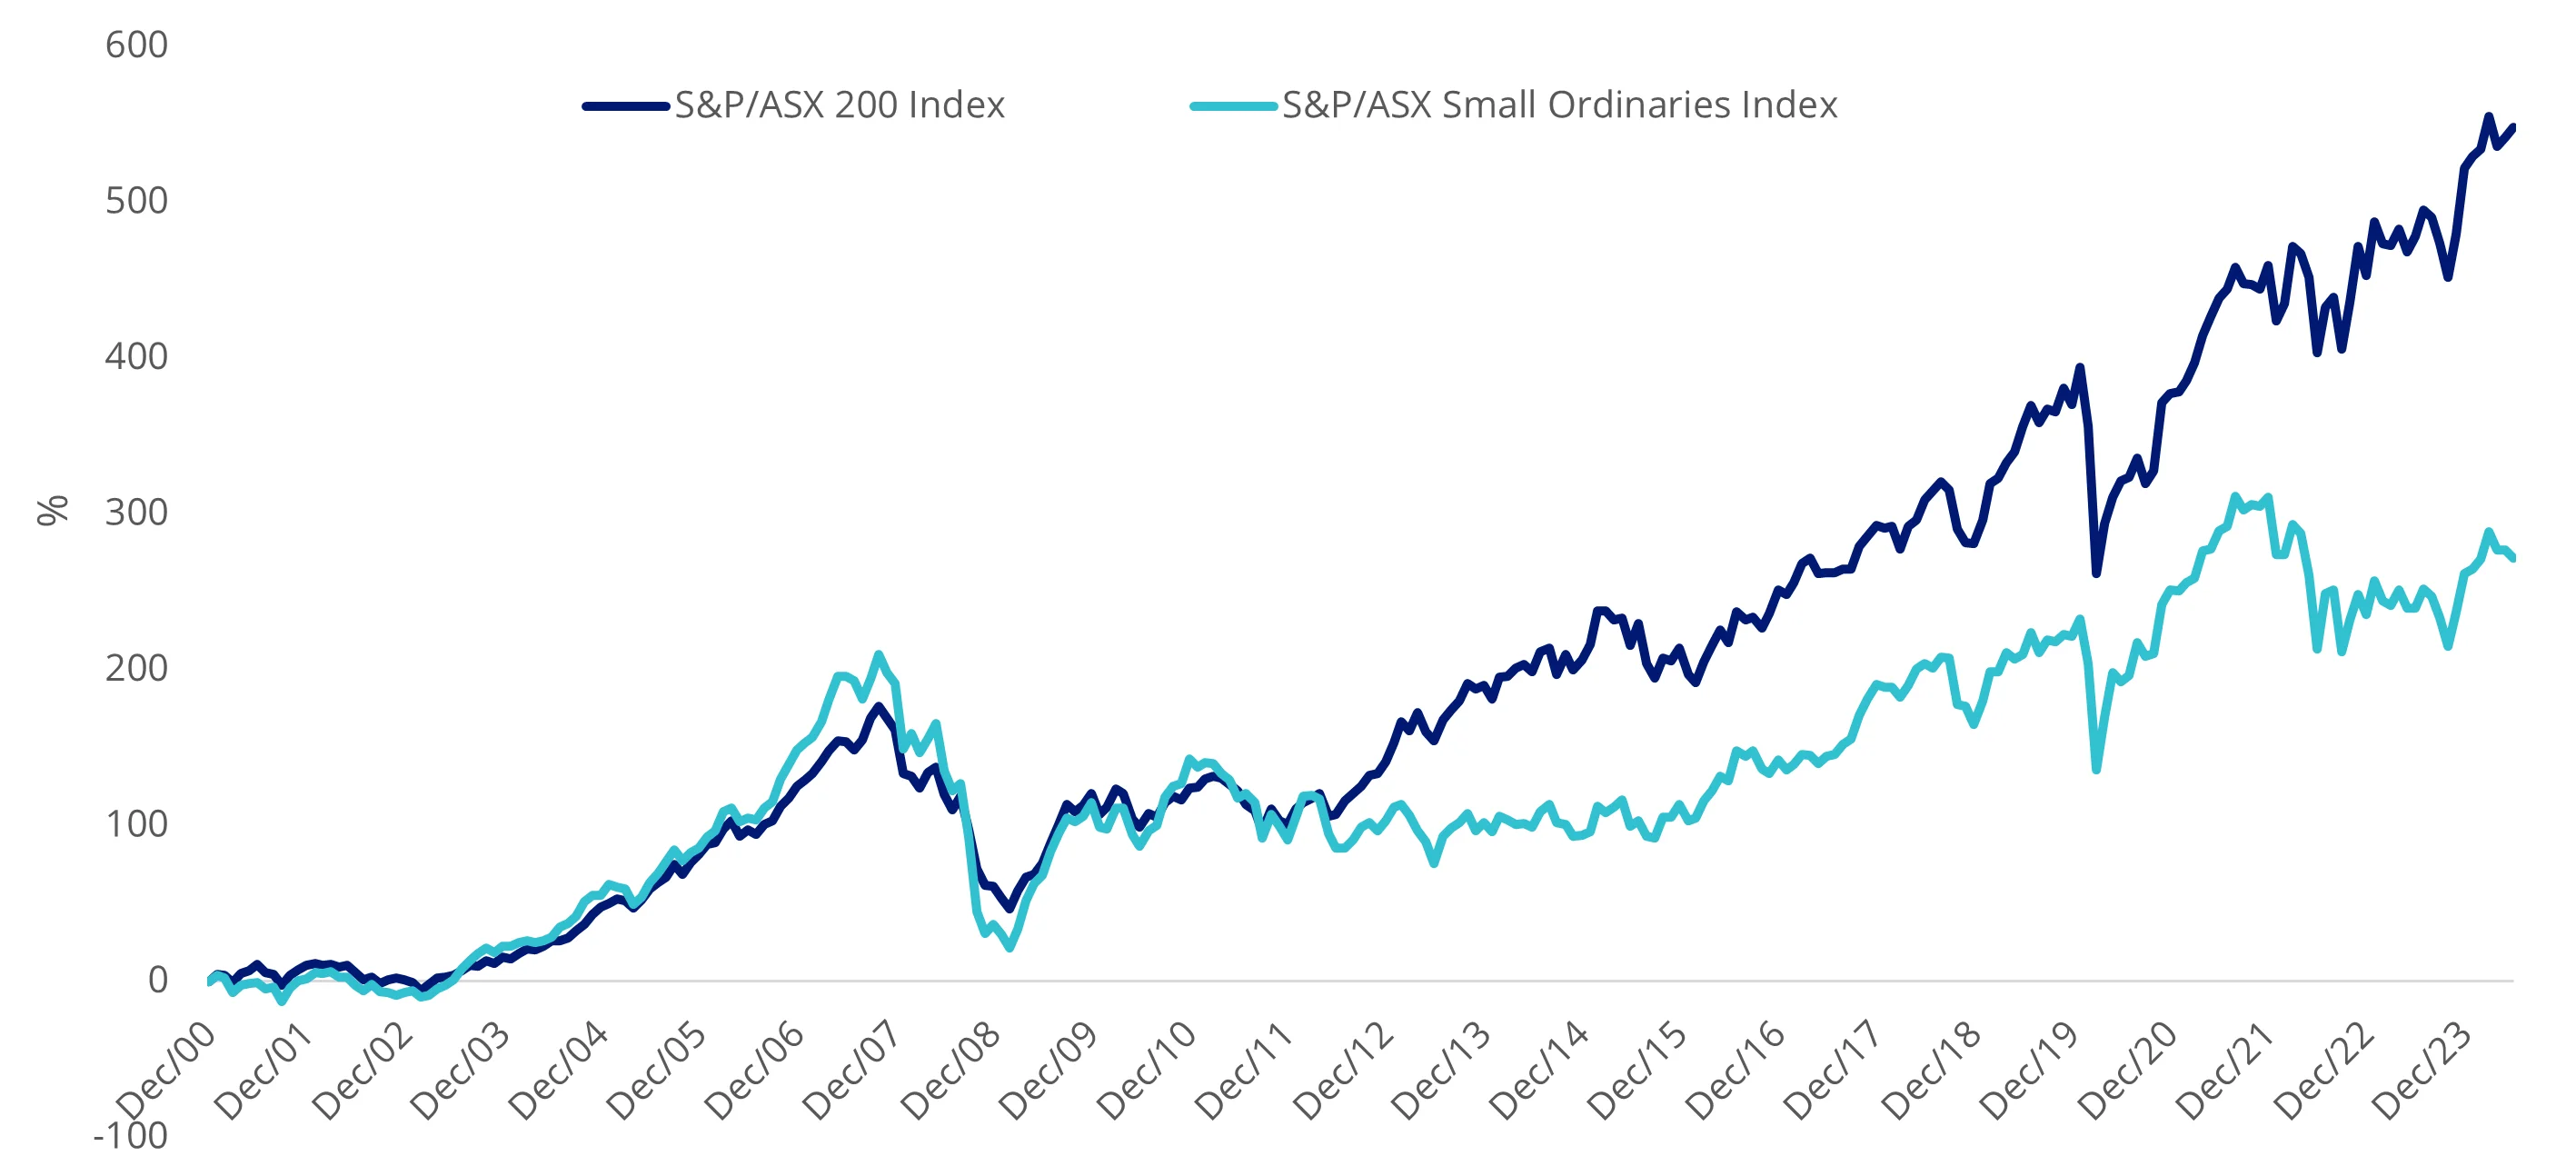  Australian small companies have underperformed Australian larger companies